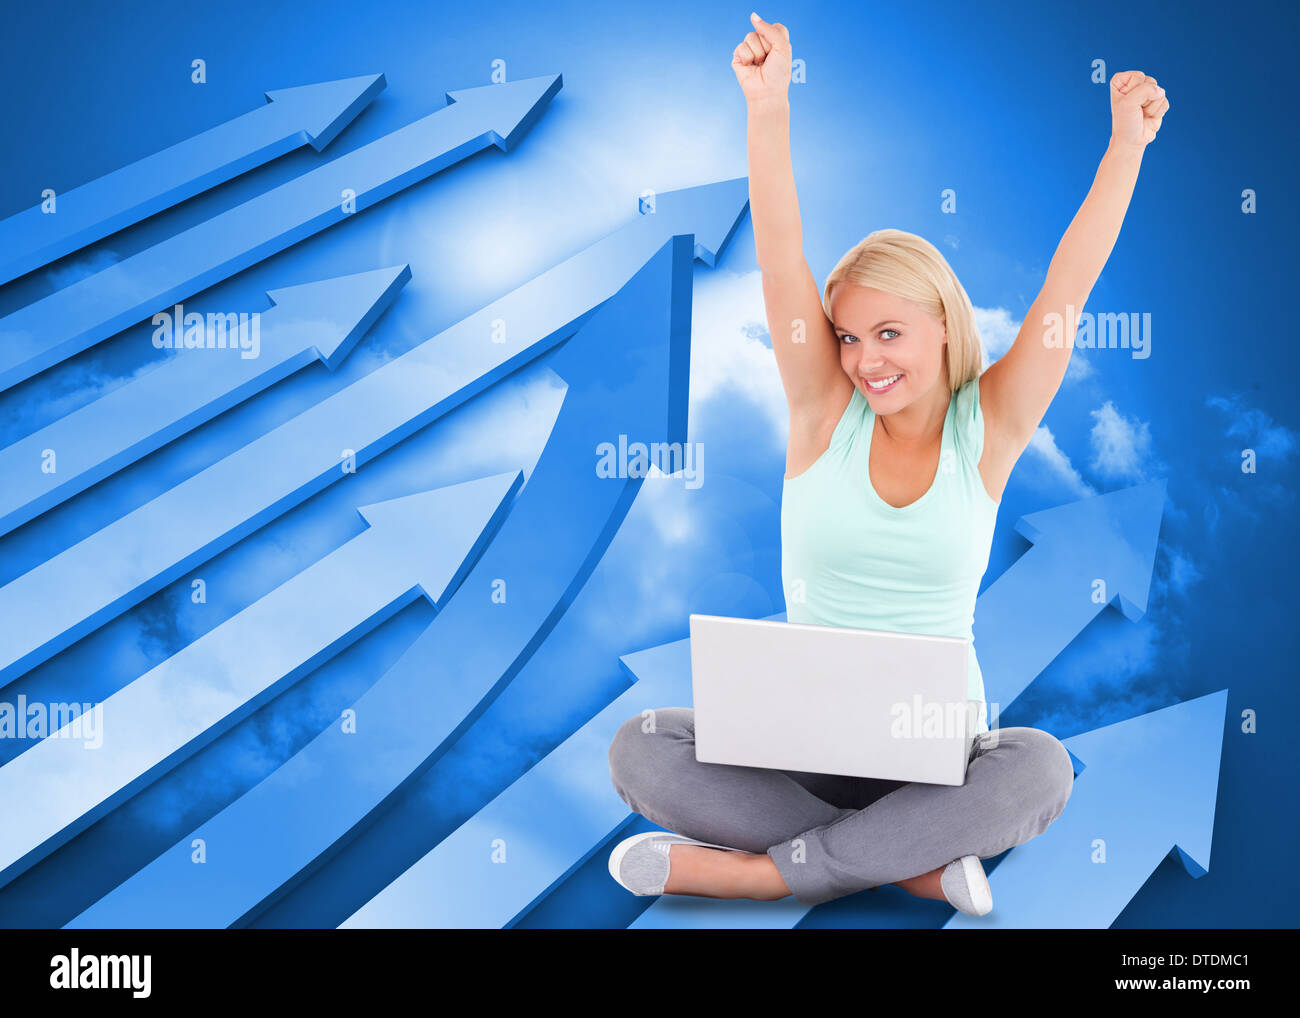 Composite image of joyful woman with a notebook Stock Photo